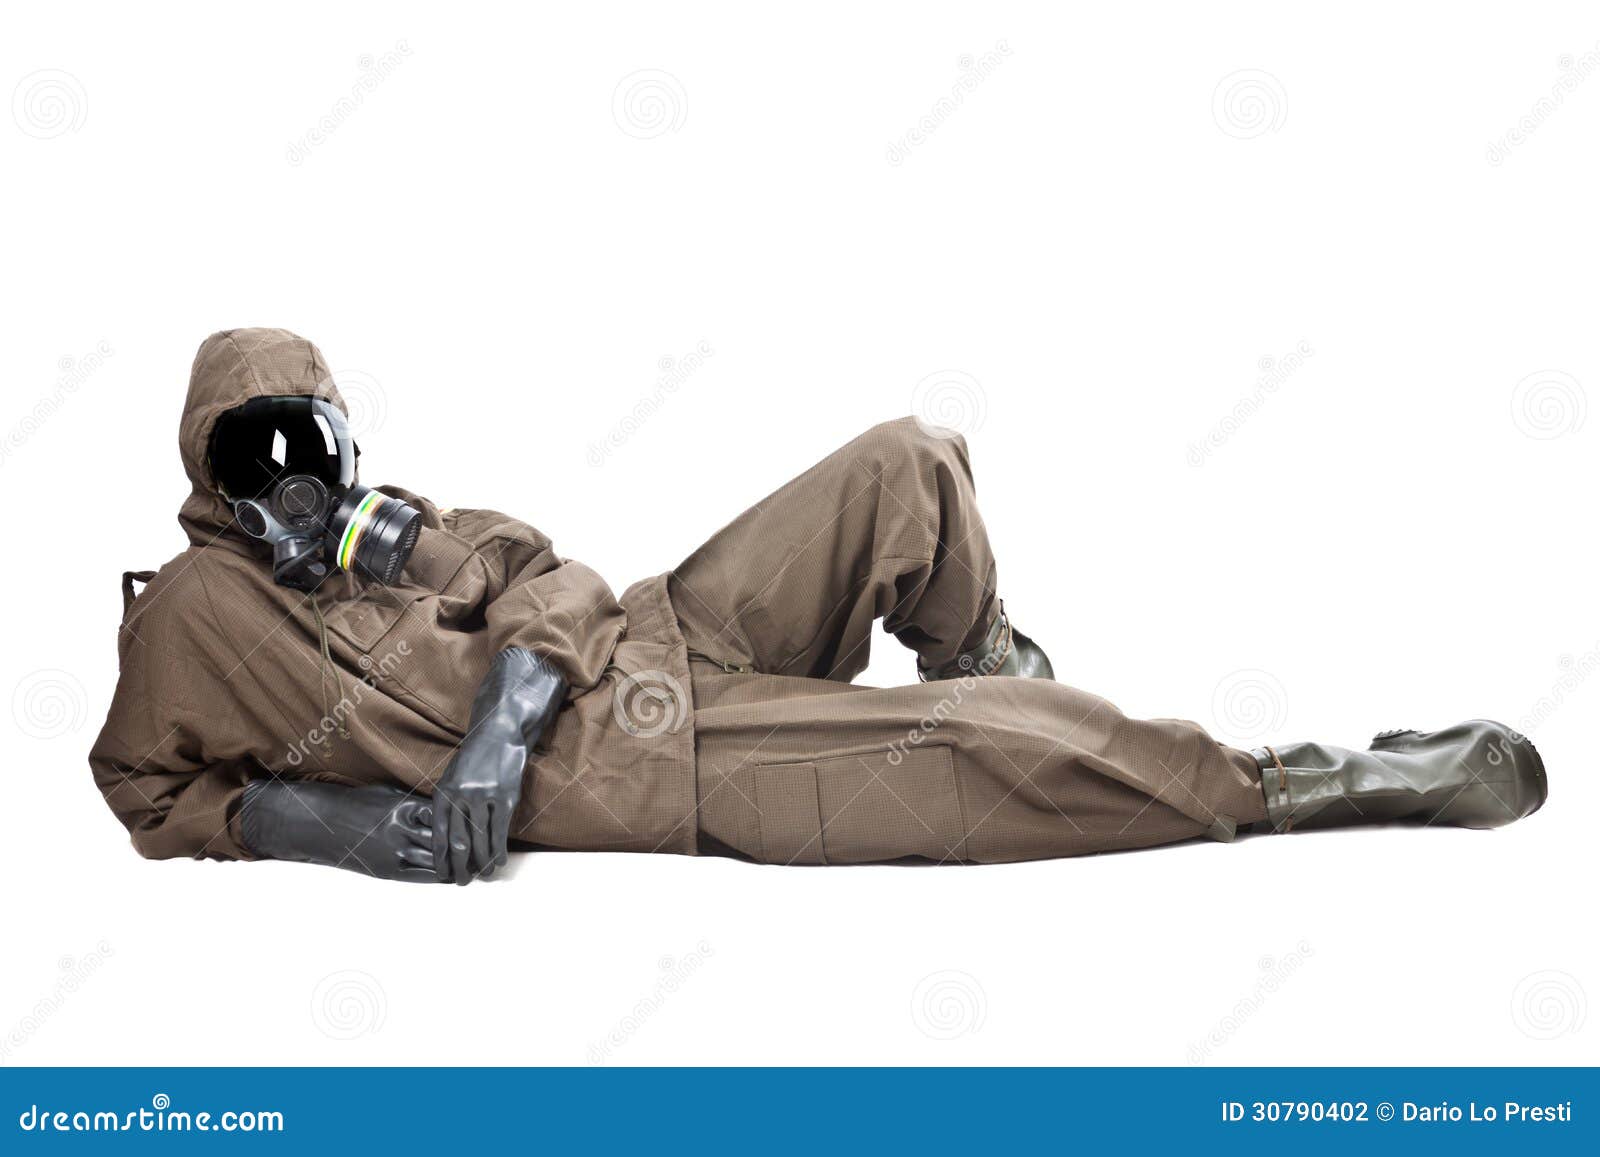 man-hazard-suit-layng-ground-wearing-nbc-suite-nuclear-biological-chemical-30790402.jpg